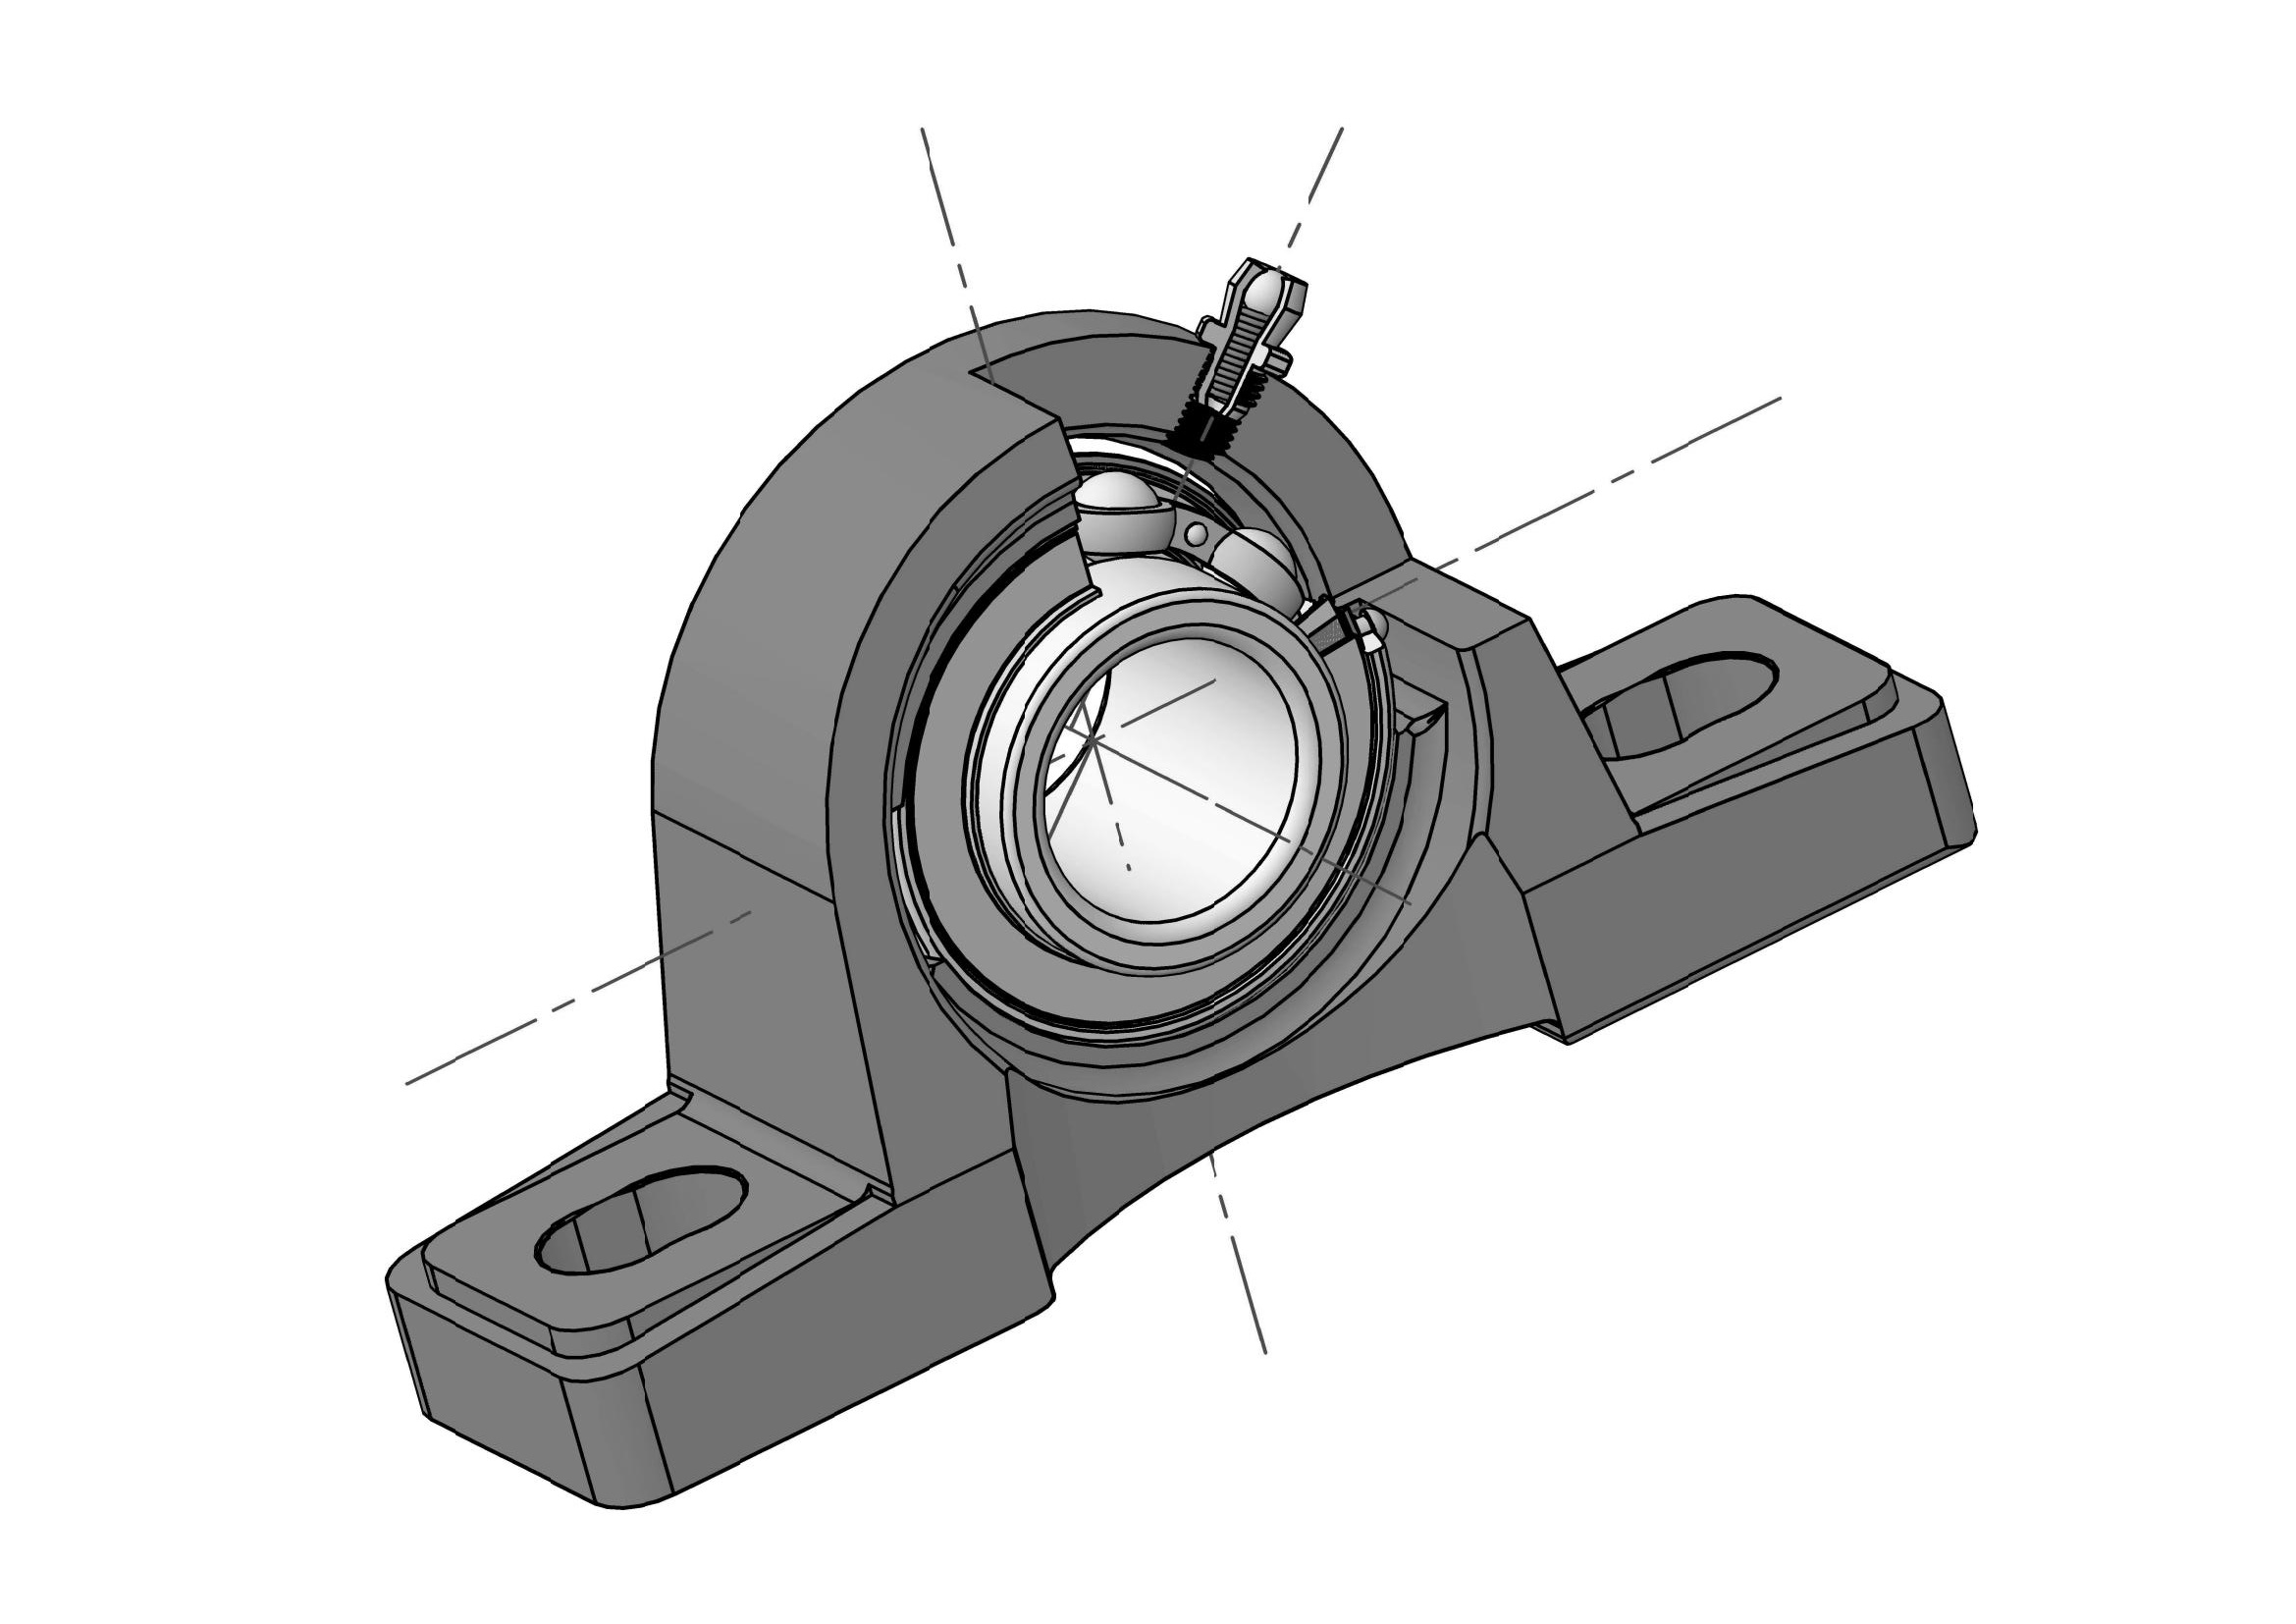 UCP214-43 Pillow block ball bearing units with 2-11/16 inch bore